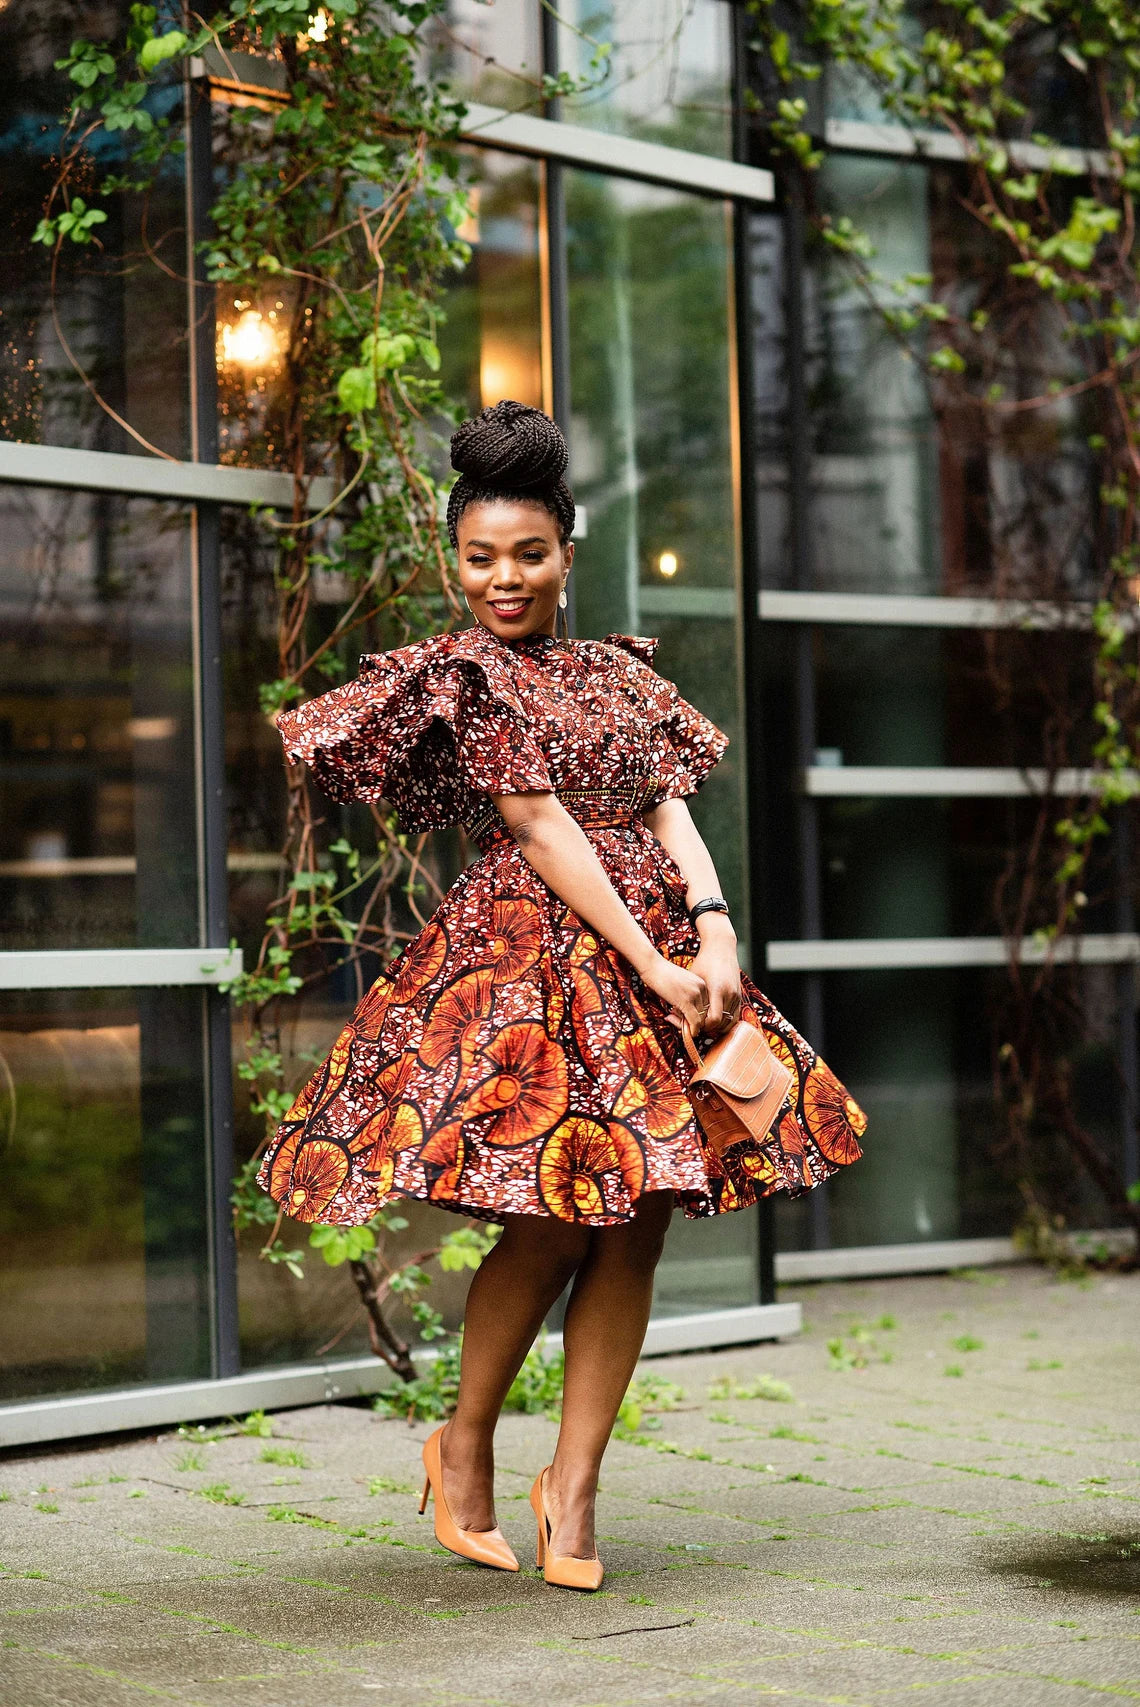 Lanre Brown Ankara High Neck Dress: Elegant African-Inspired Attire (Hand Made in Nigeria) - Flexi Africa - Flexi Africa offers Free Delivery Worldwide - Vibrant African traditional clothing showcasing bold prints and intricate designs